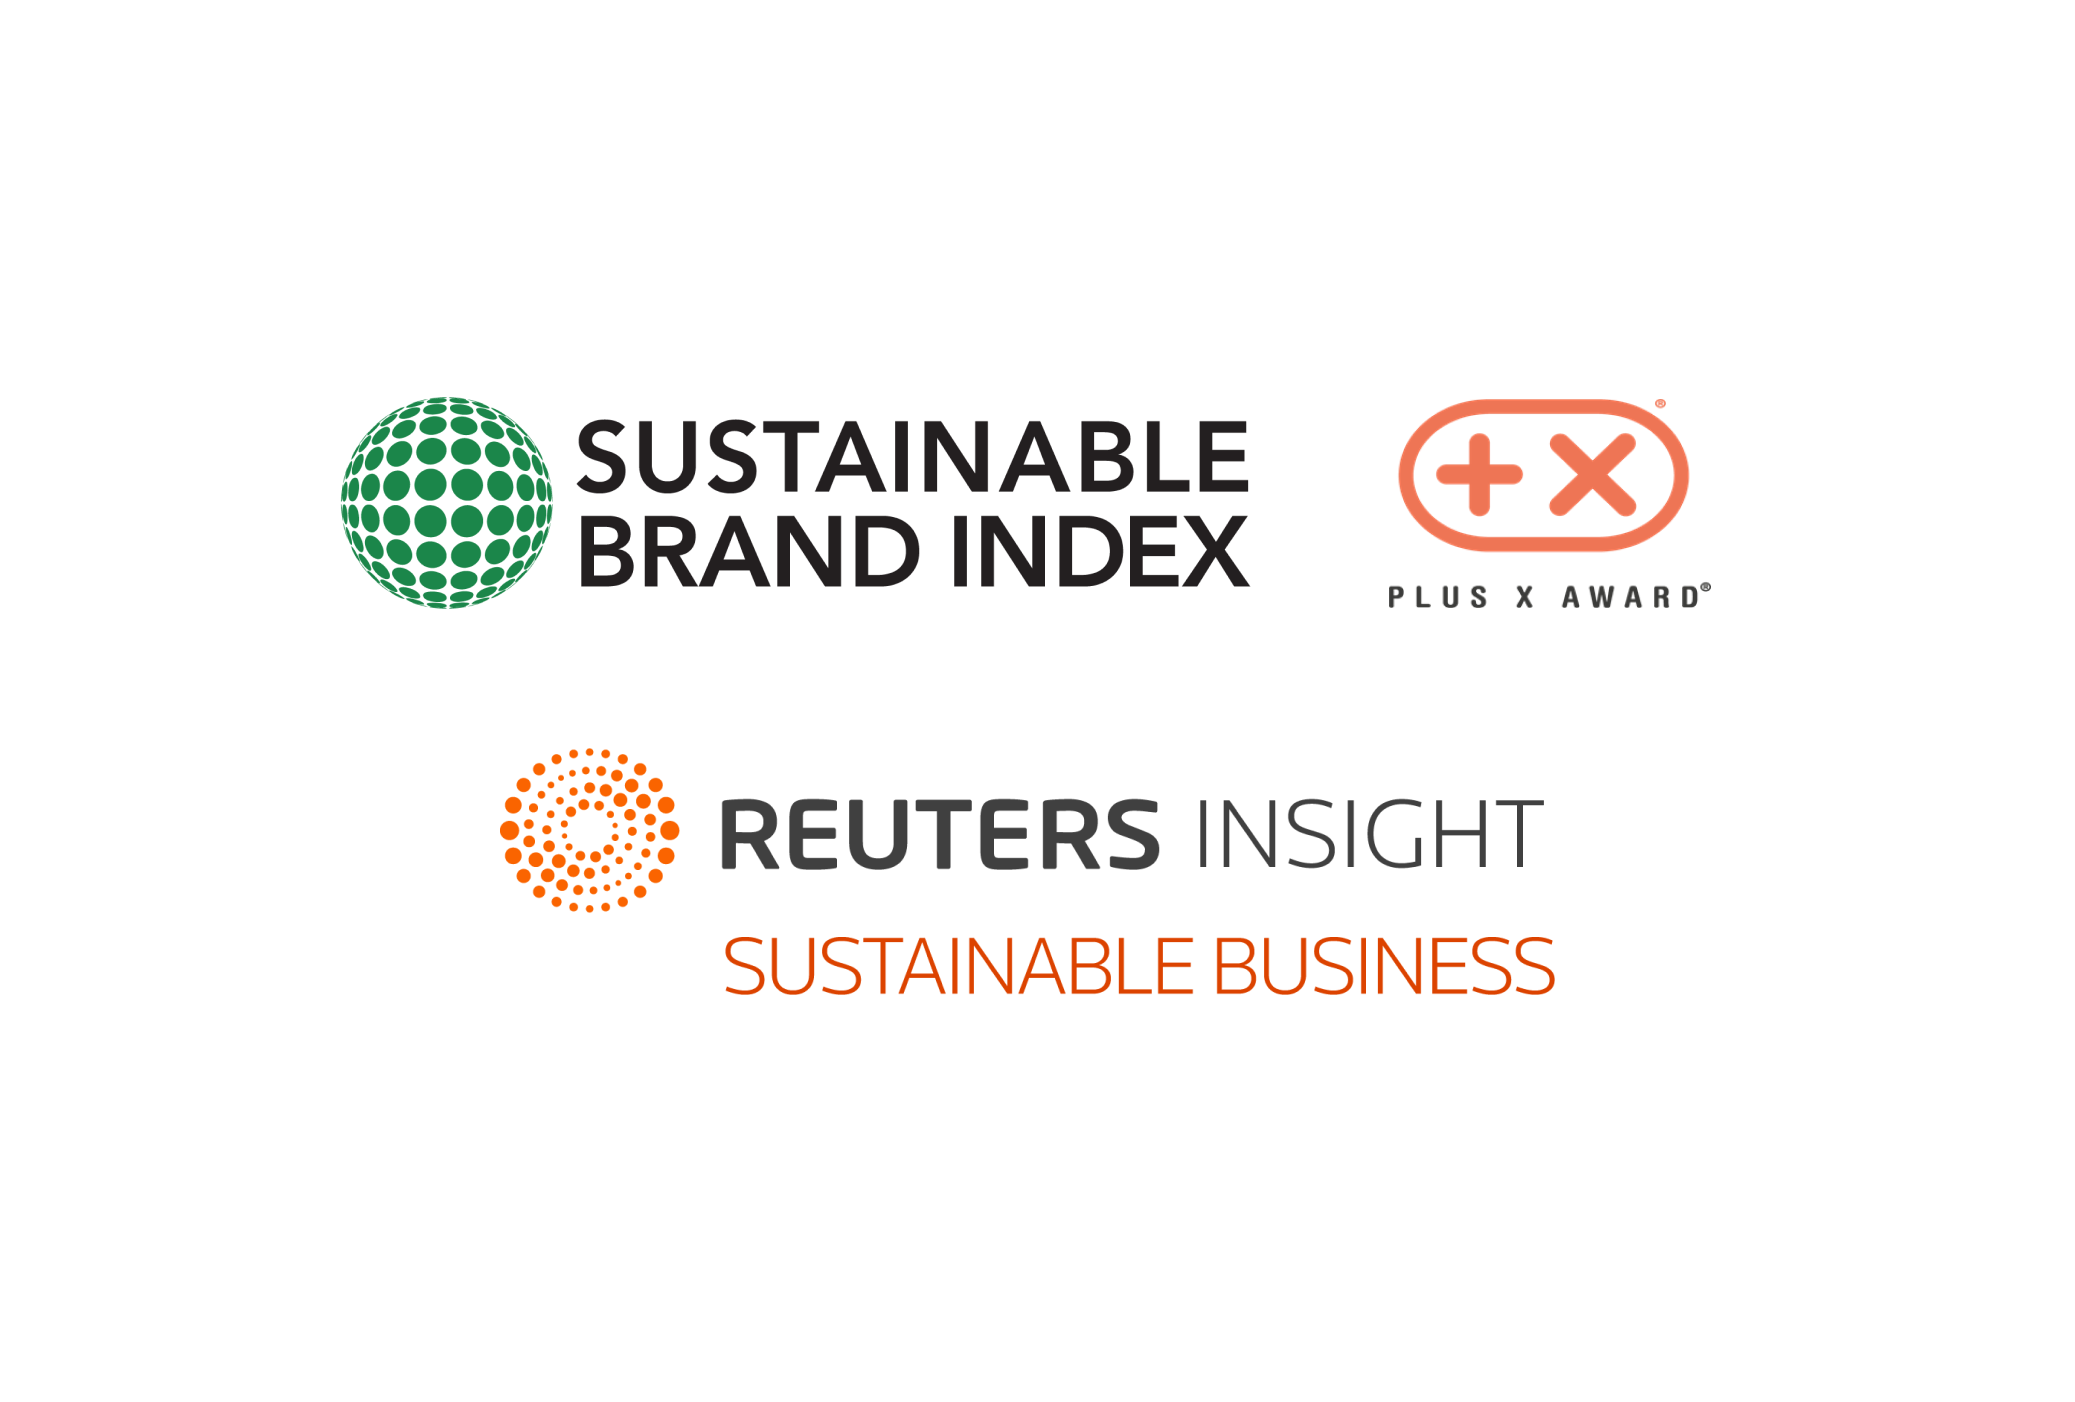 Sustainable Brand index, Plus X award, Reuters insight Sustainable business